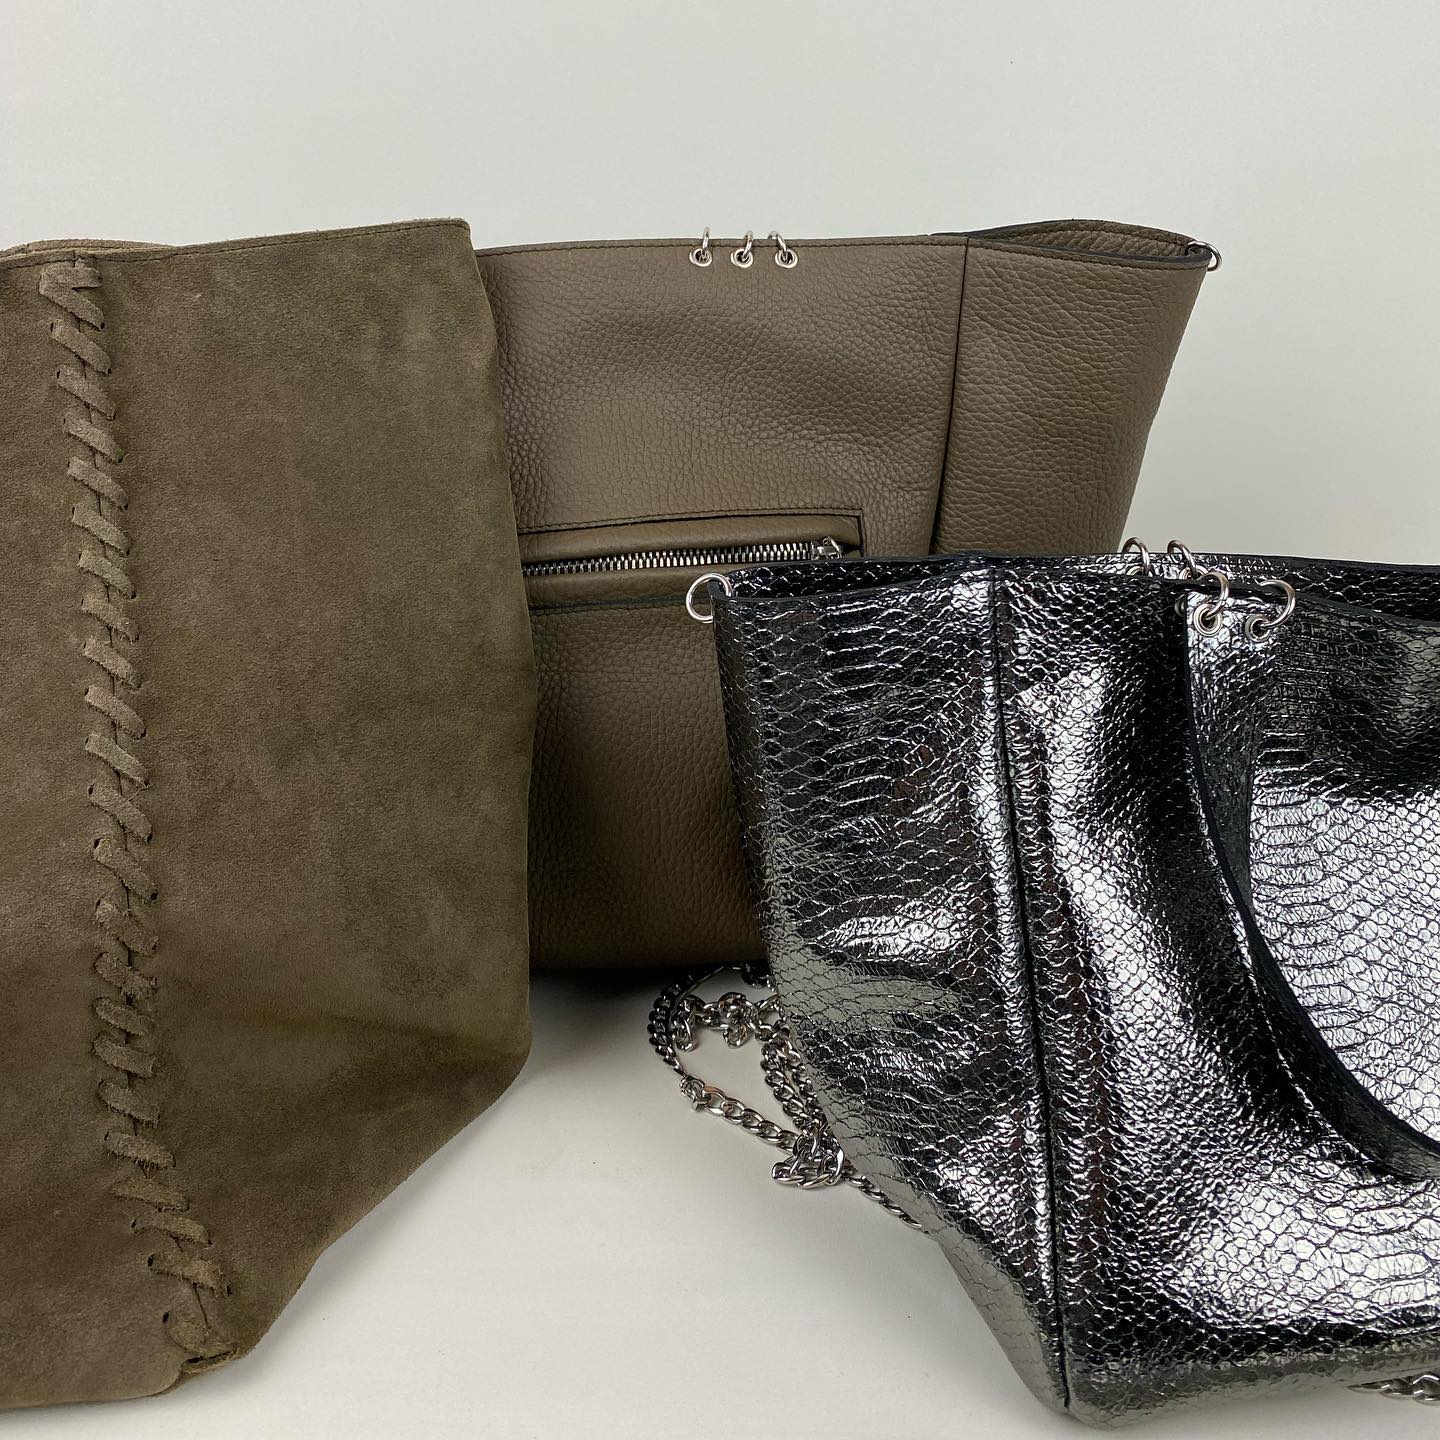 5-february-aixenprovence-carlo-app-leather goods